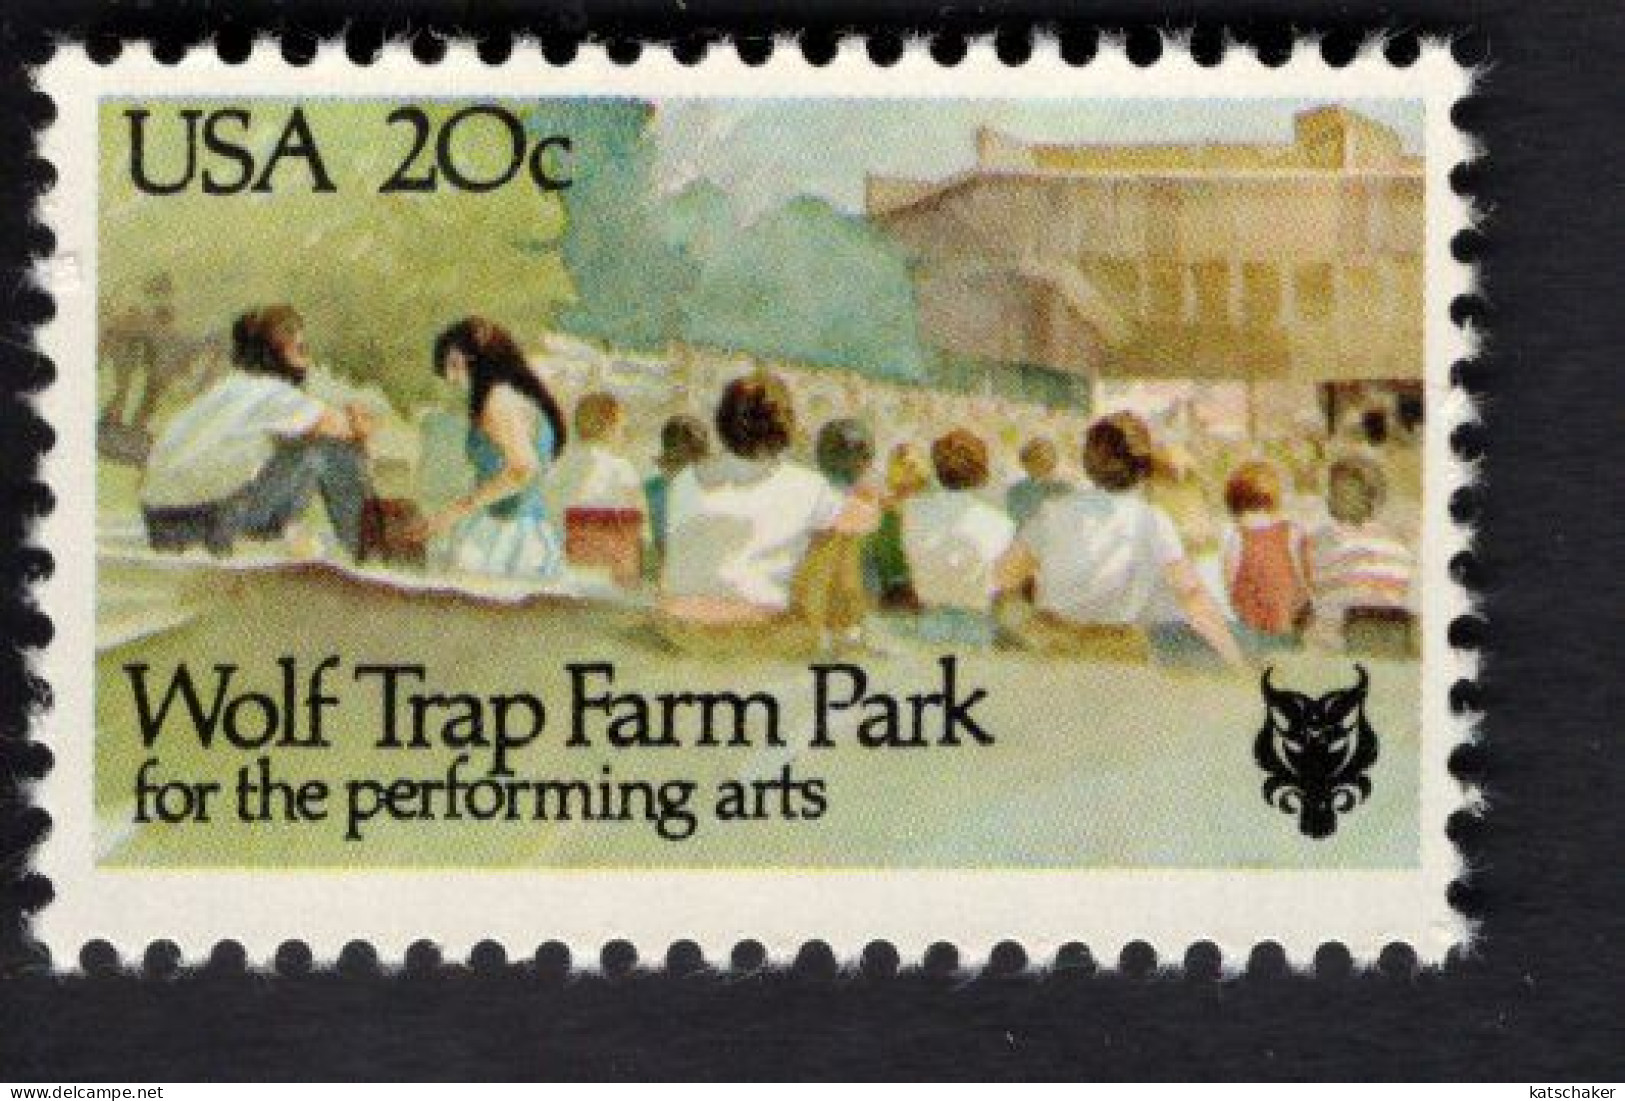 207004924 1982 SCOTT 2018 (XX) POSTFRIS MINT NEVER HINGED   - WOLF TRAP FARM PARK FOR THE PERFORMING ARTS - Unused Stamps